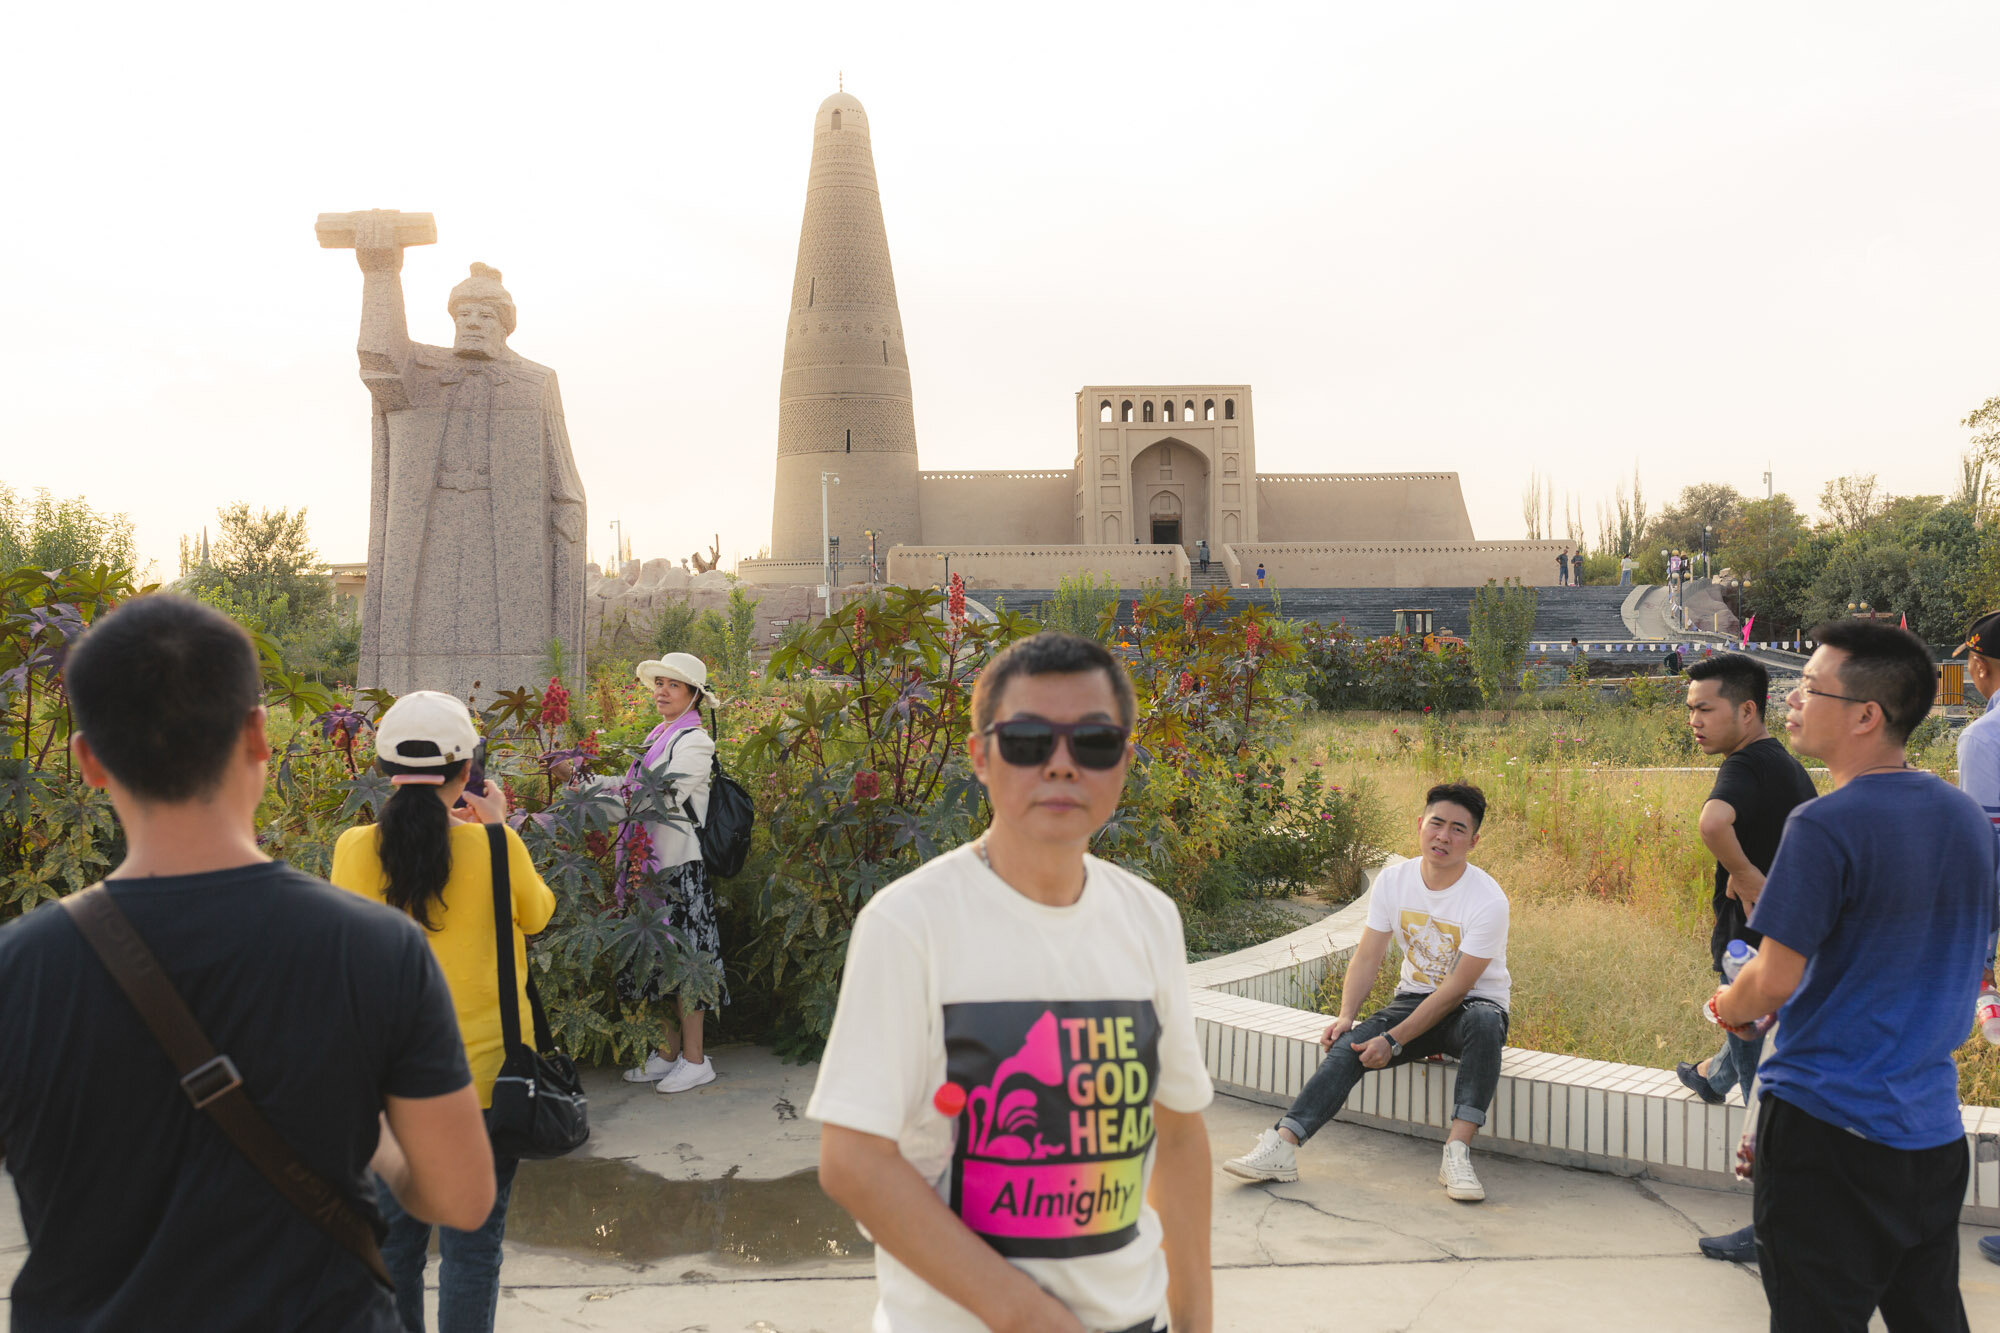  September 26th 2019. Turpan, Xinjiang province, China. Han Chinese tourists visiting the site of the Emin Minaret and Mosque. 